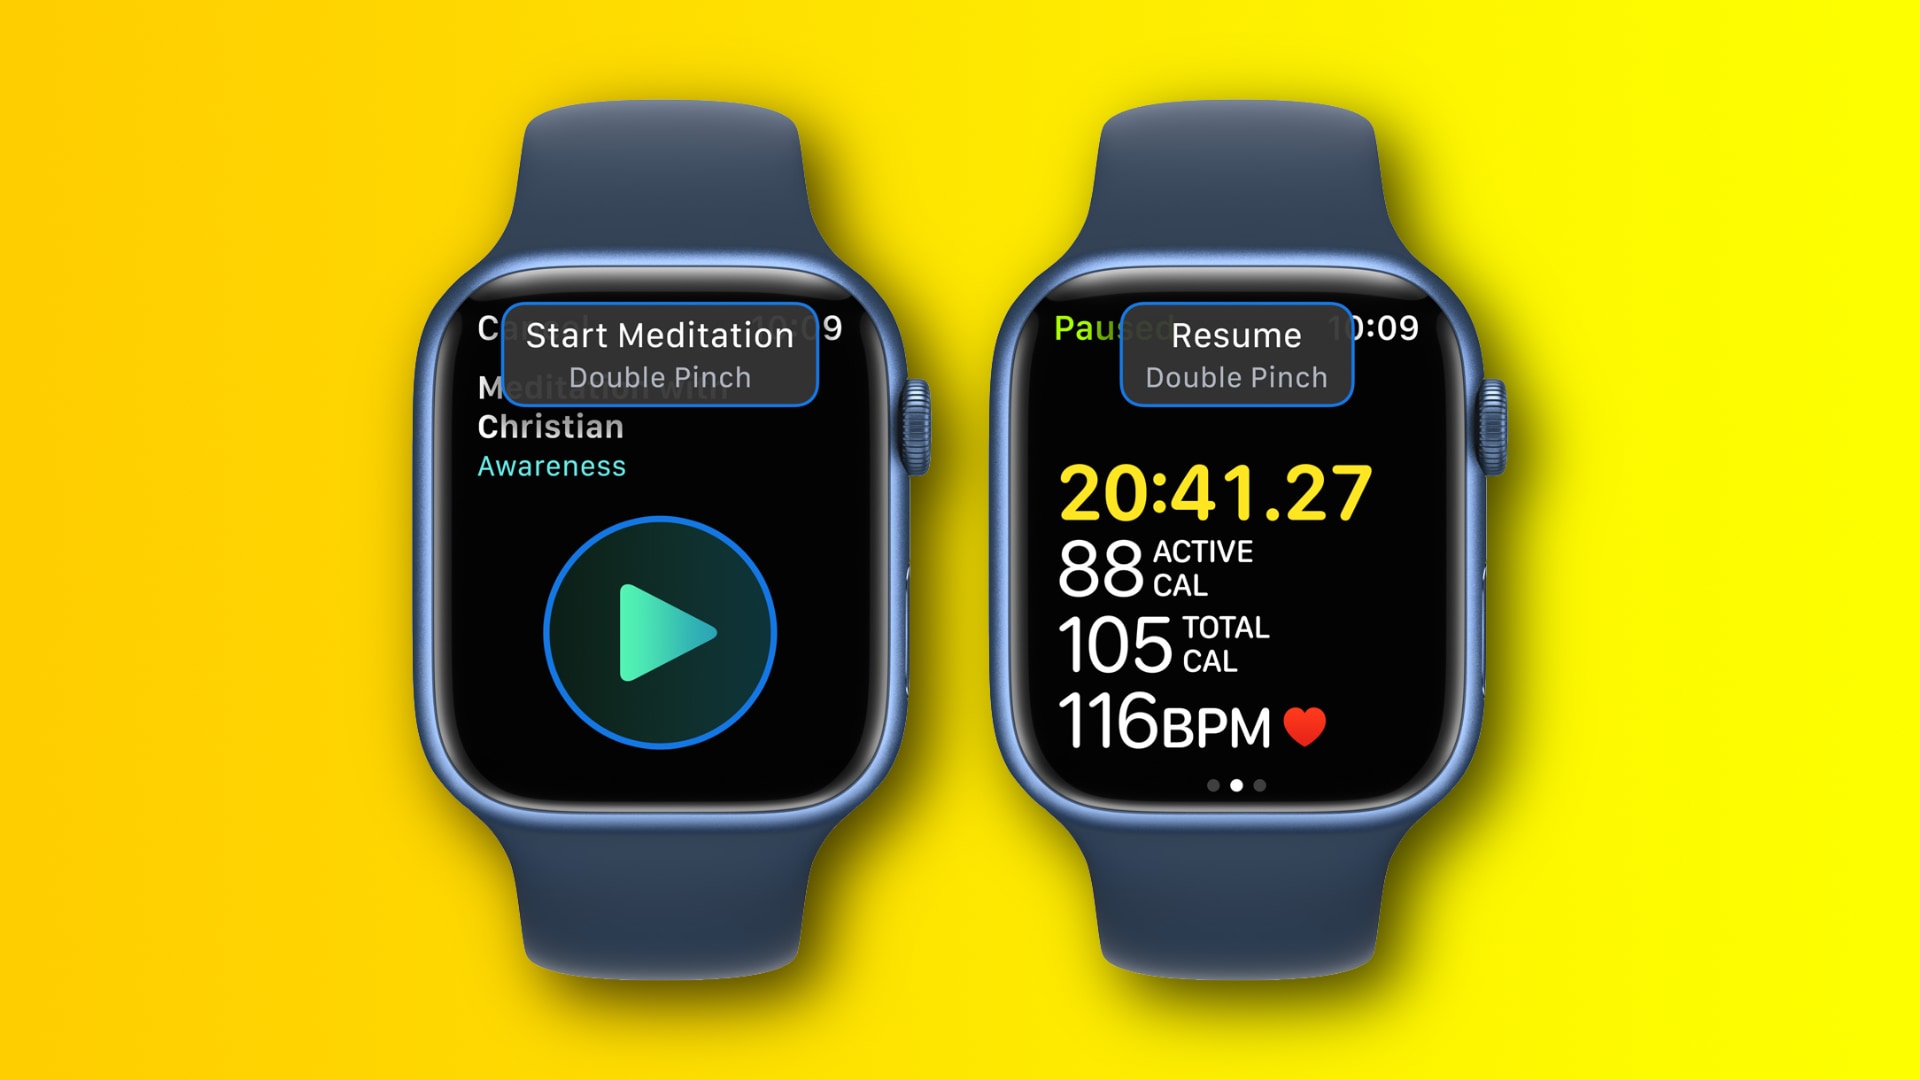 Using Apple Watch hand gestures to start a meditation session and resume a workout